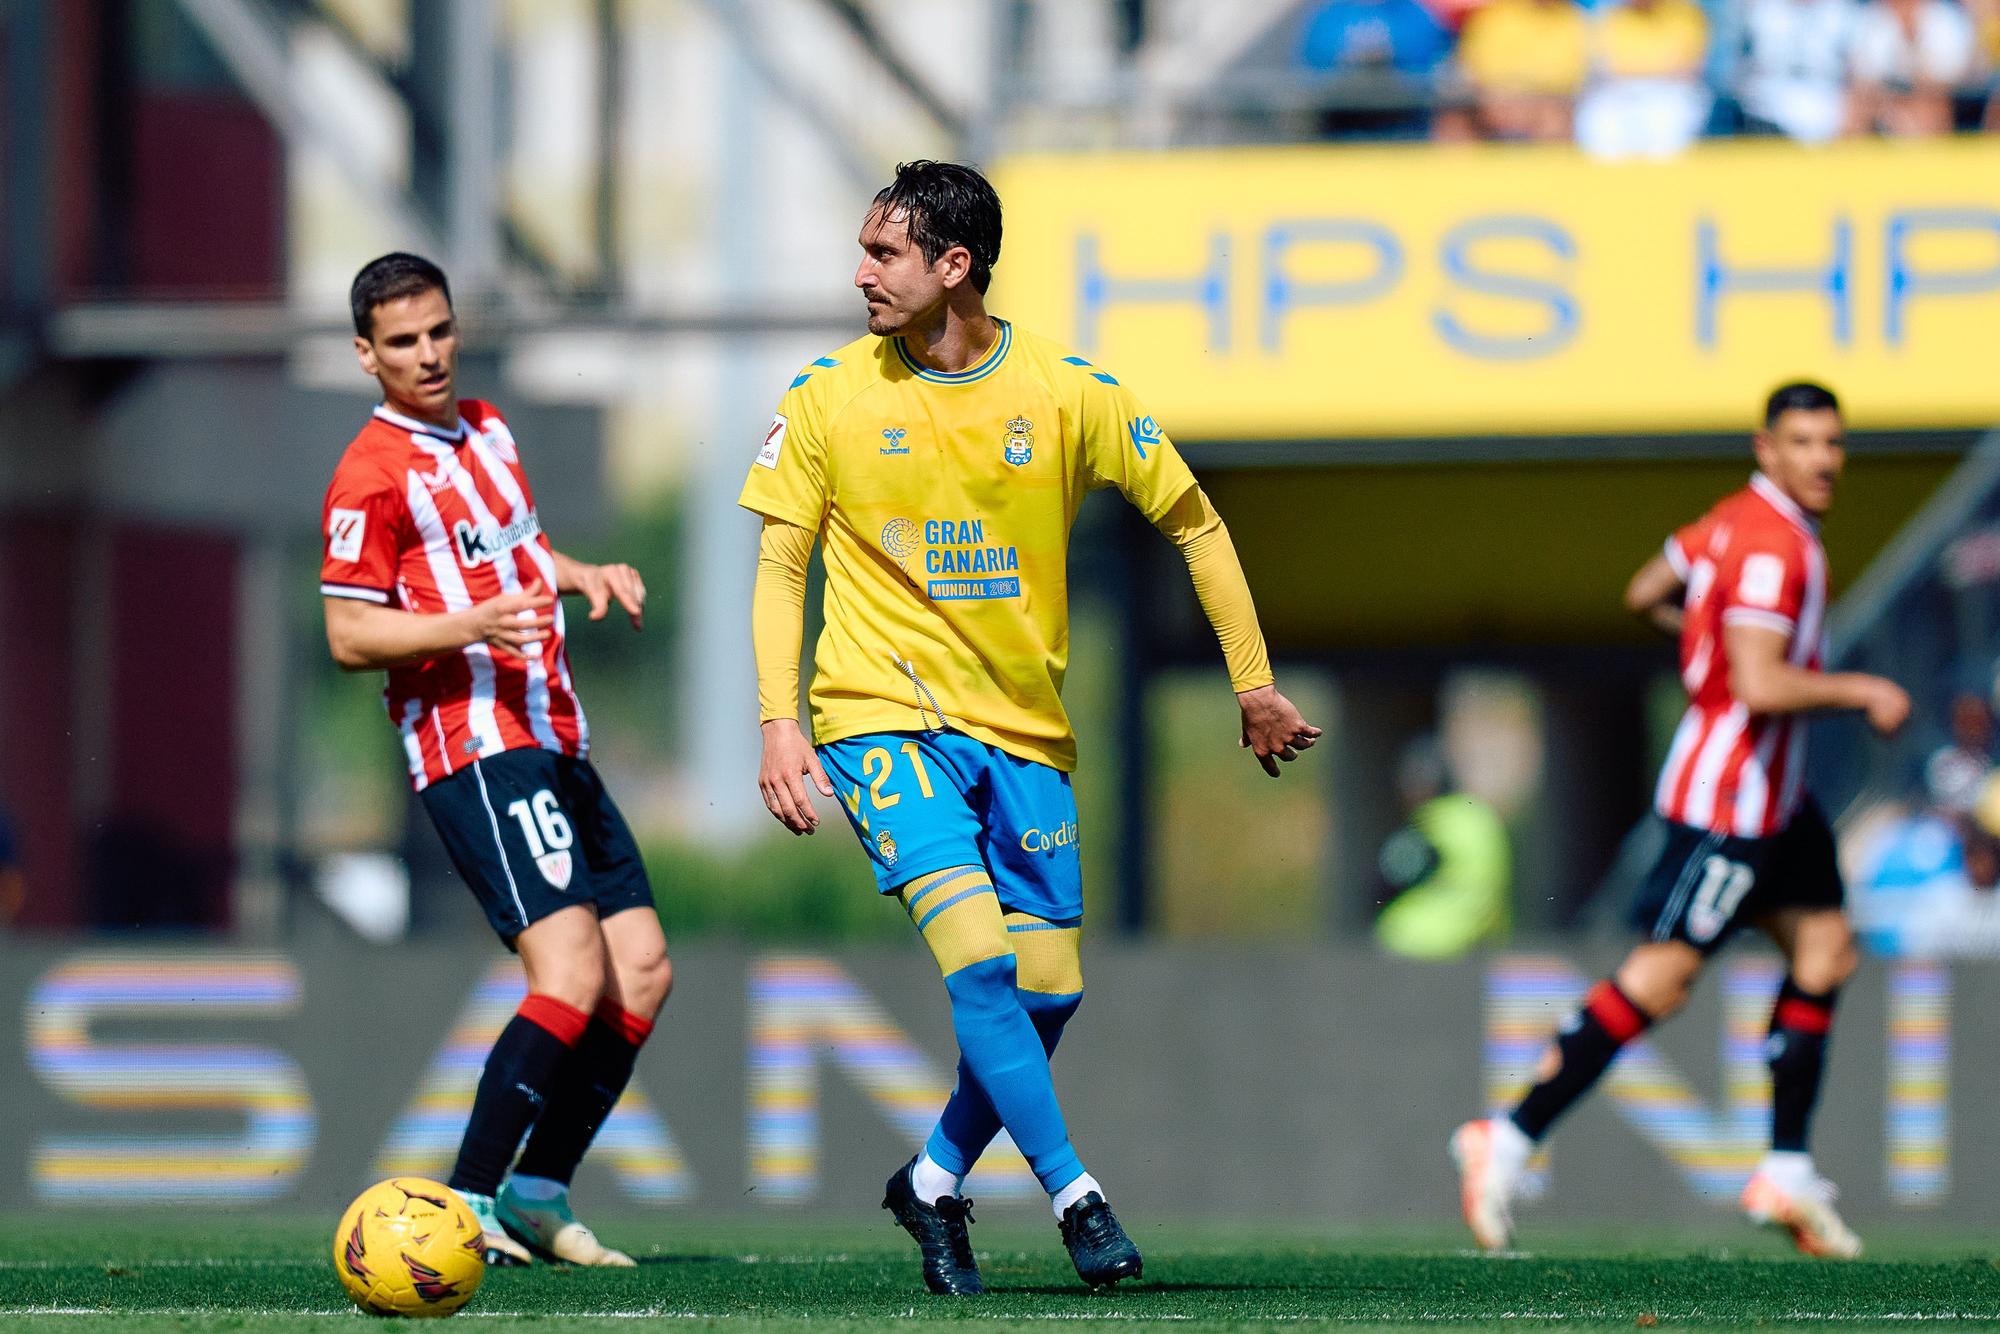 Jose Campana of UD Las Palmas in action during the Spanish league, La Liga EA Sports, football match played between UD Las Palmas and Athletic Club at Estadio Gran Canaria on March 10, 2024, in Las Palmas de Gran Canaria, Spain. AFP7 10/03/2024 ONLY FOR USE IN SPAIN / Gabriel Jimenez / AFP7 / Europa Press;2024;SOCCER;Sport;ZSOCCER;ZSPORT;UD Las Palmas v Athletic Club - La Liga EA Sports;